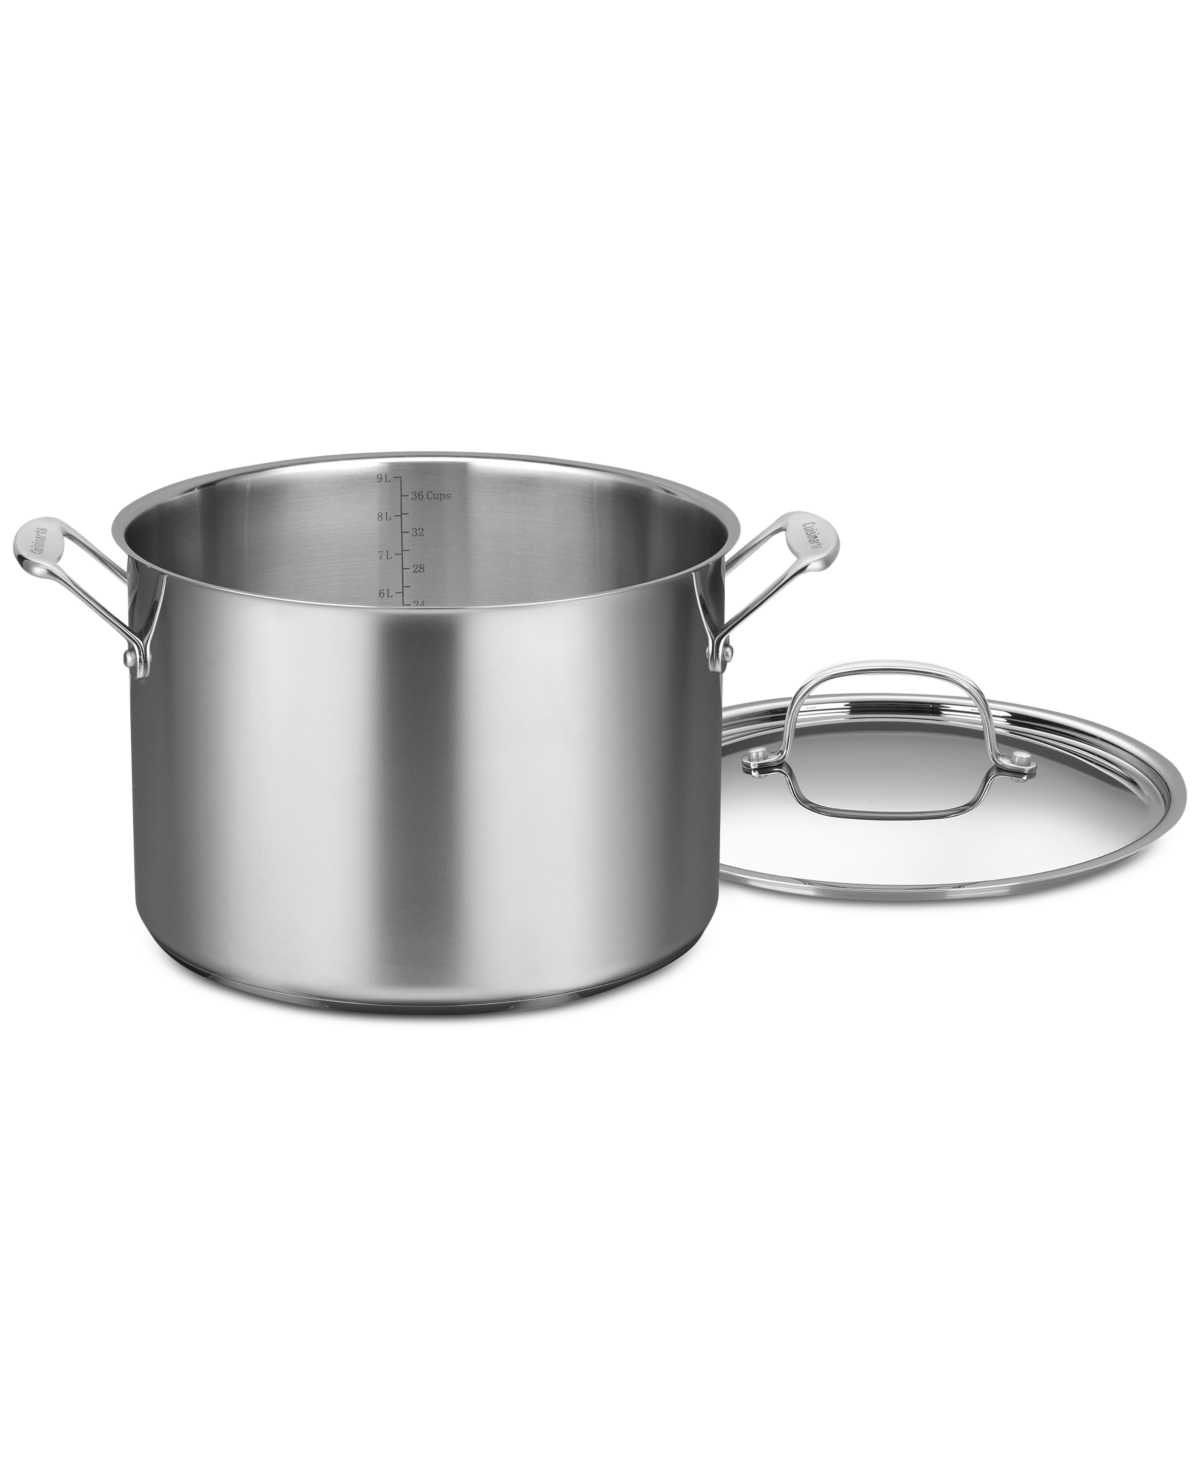 Cuisinart Chef's Classic Stainless Steel 12-qt. Covered Stockpot In Metallic